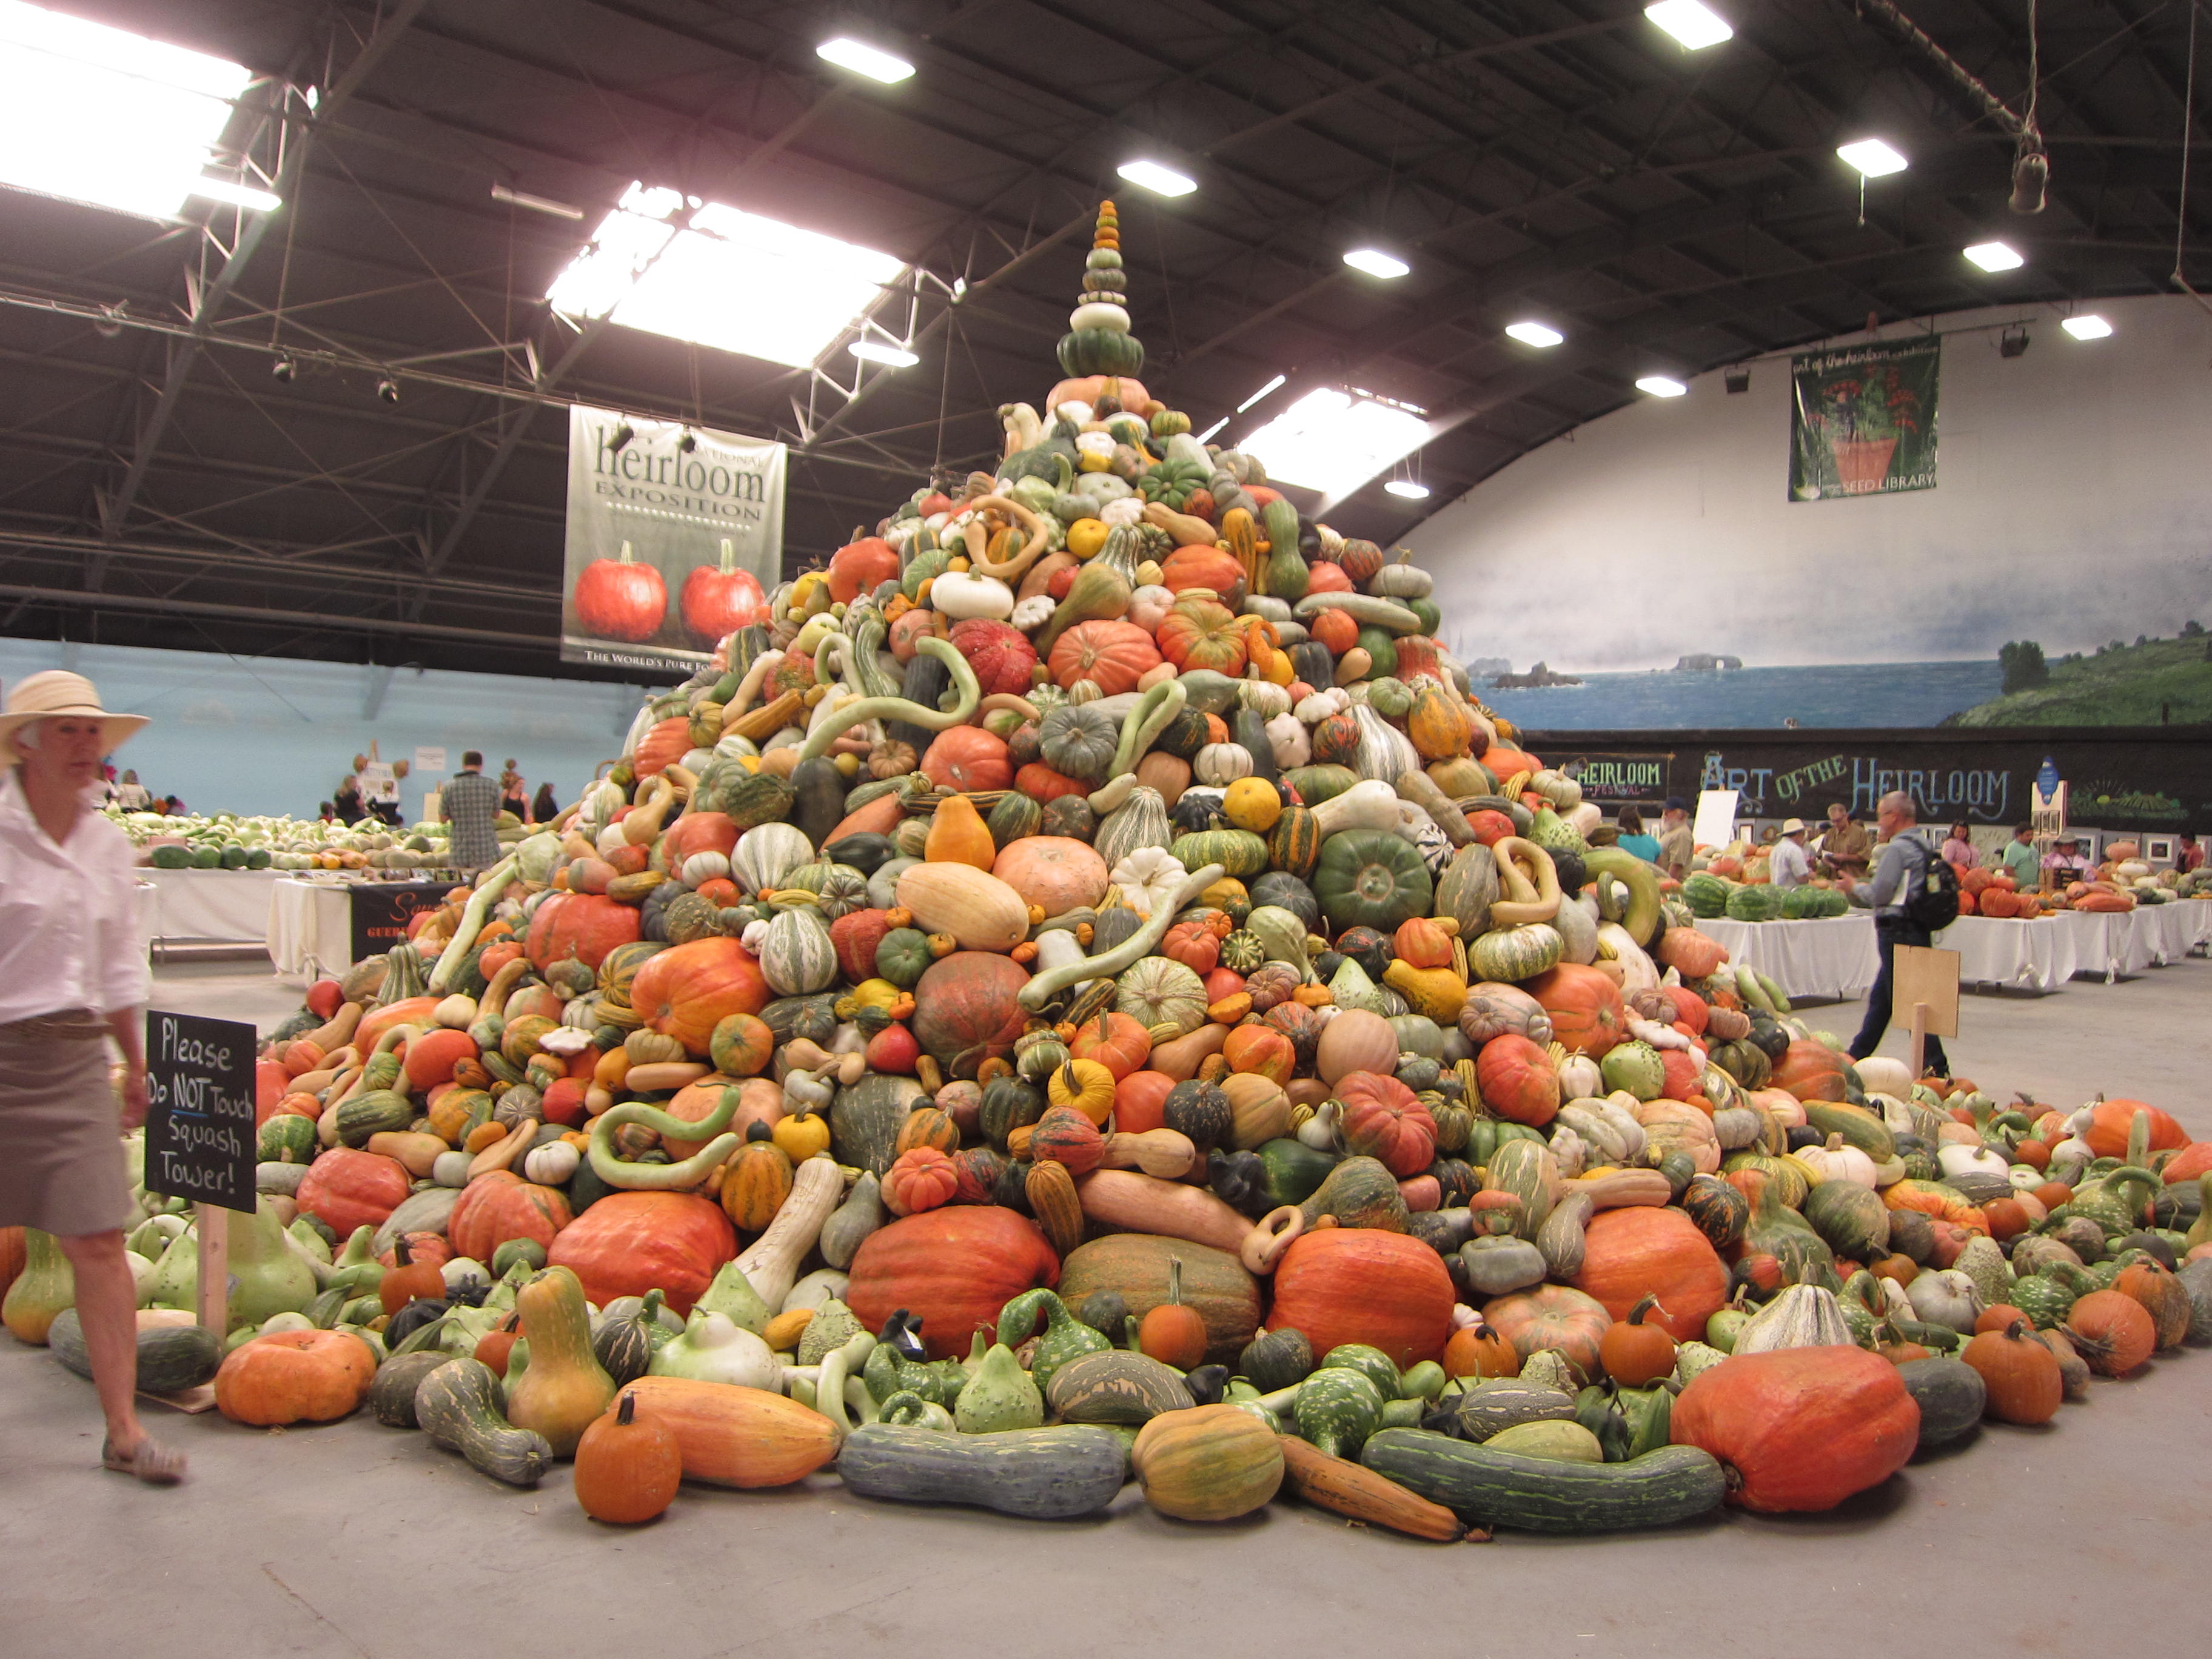 The squash tower reigns supreme over all other displays.